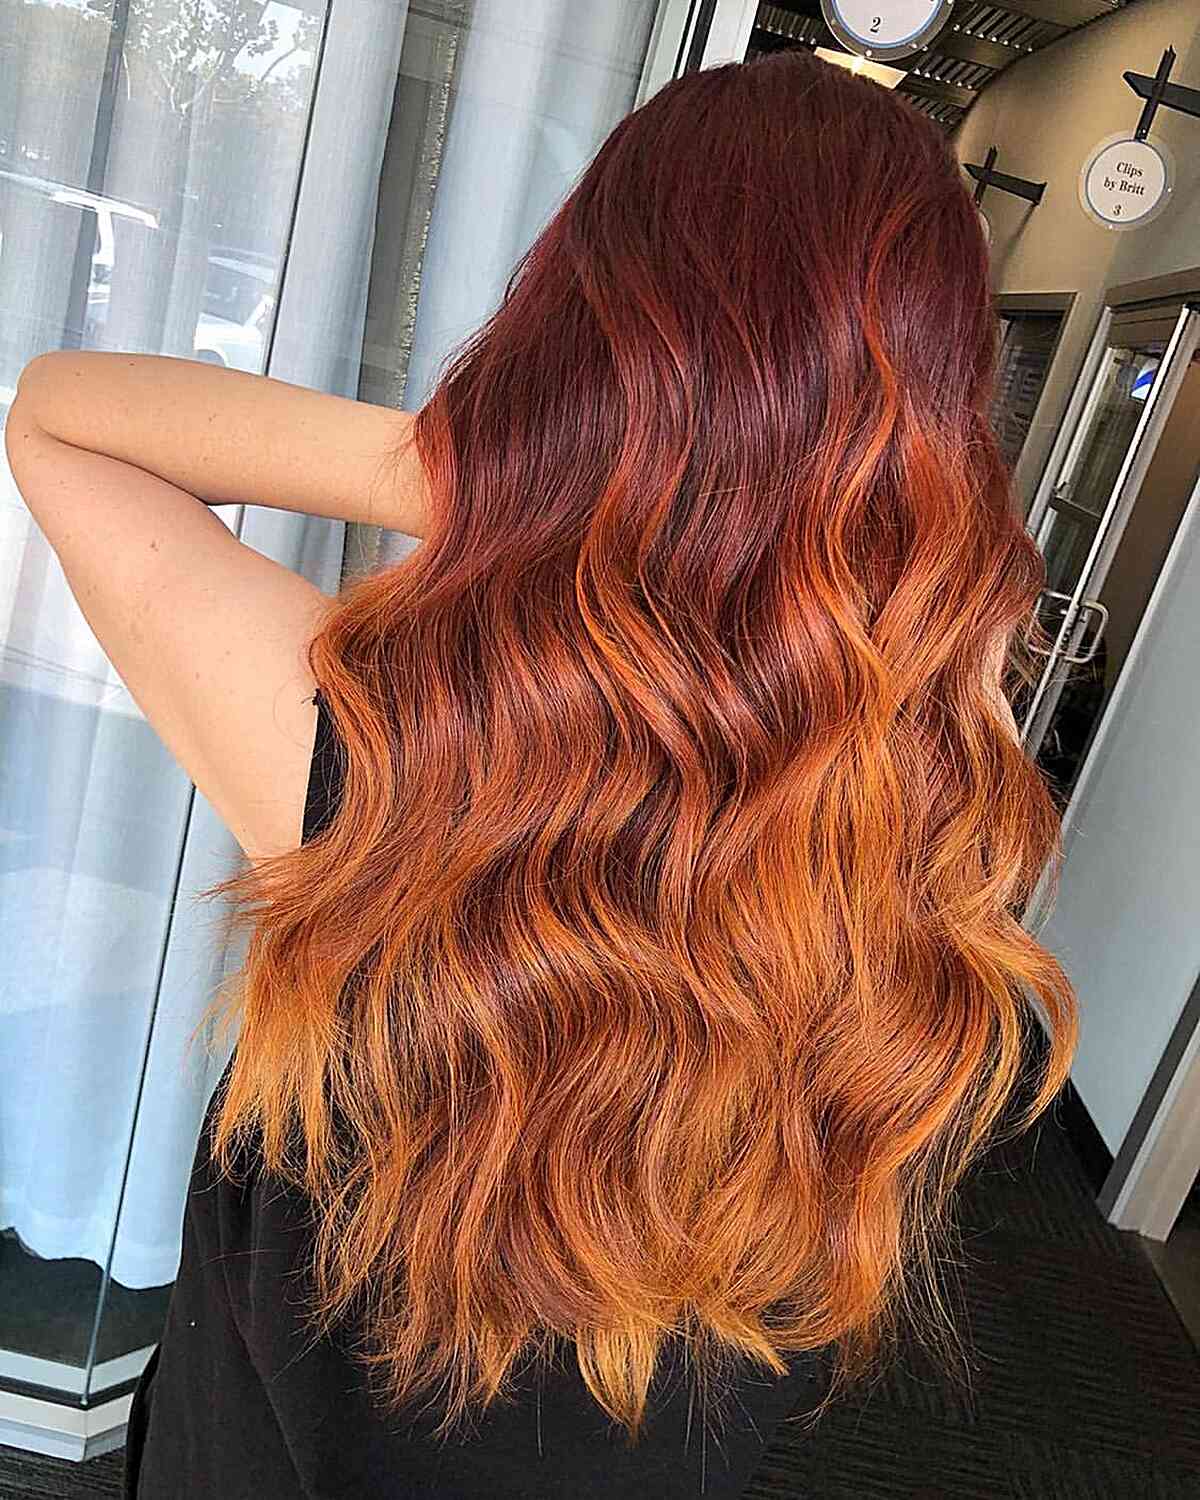 Fall-Inspired Long Ombre Hair